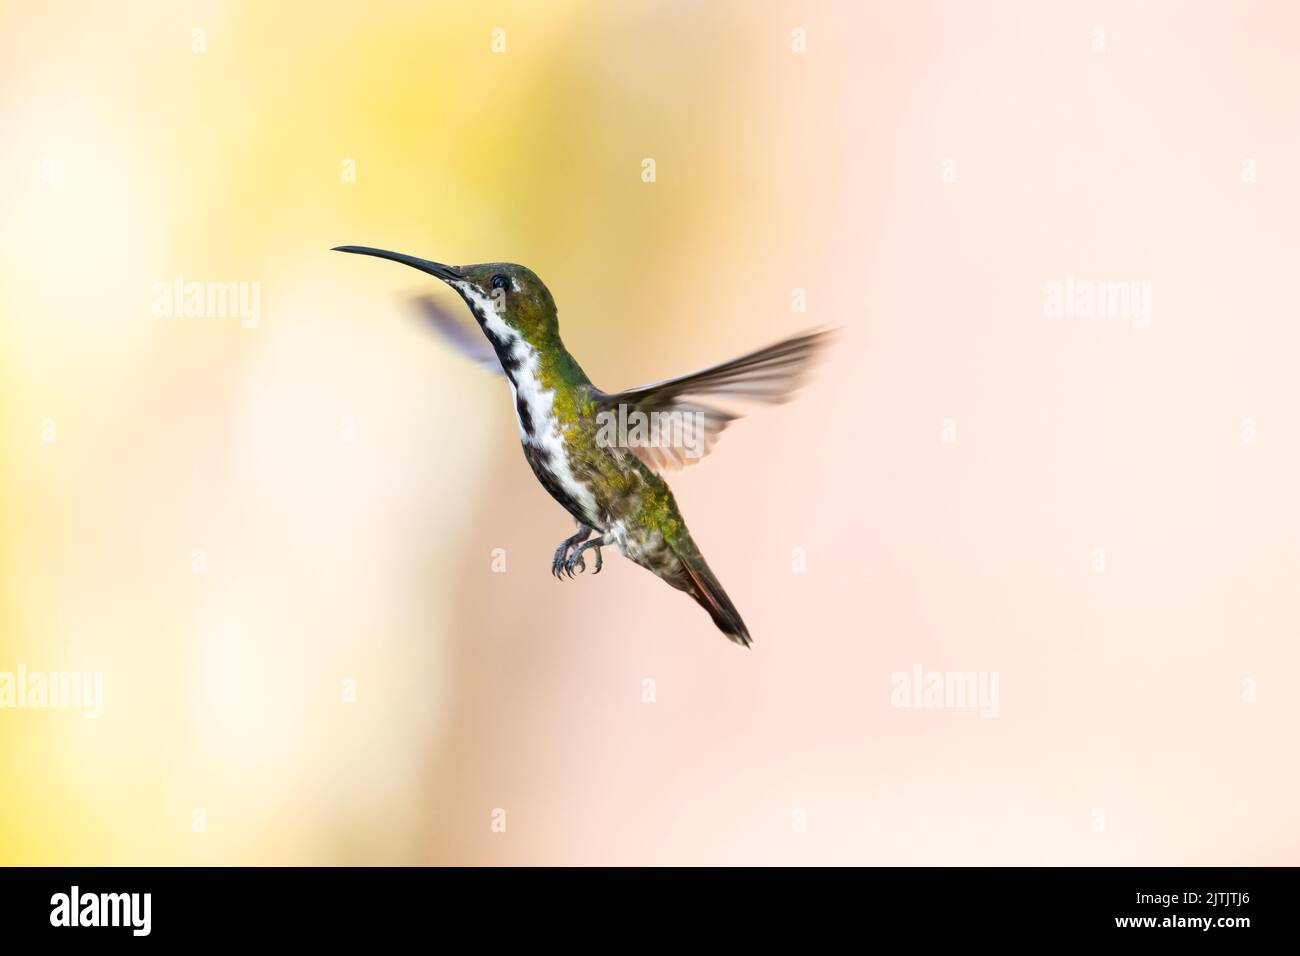 Black-throated Mango hummingbird hovering in the air with a pastel colored background. Stock Photo